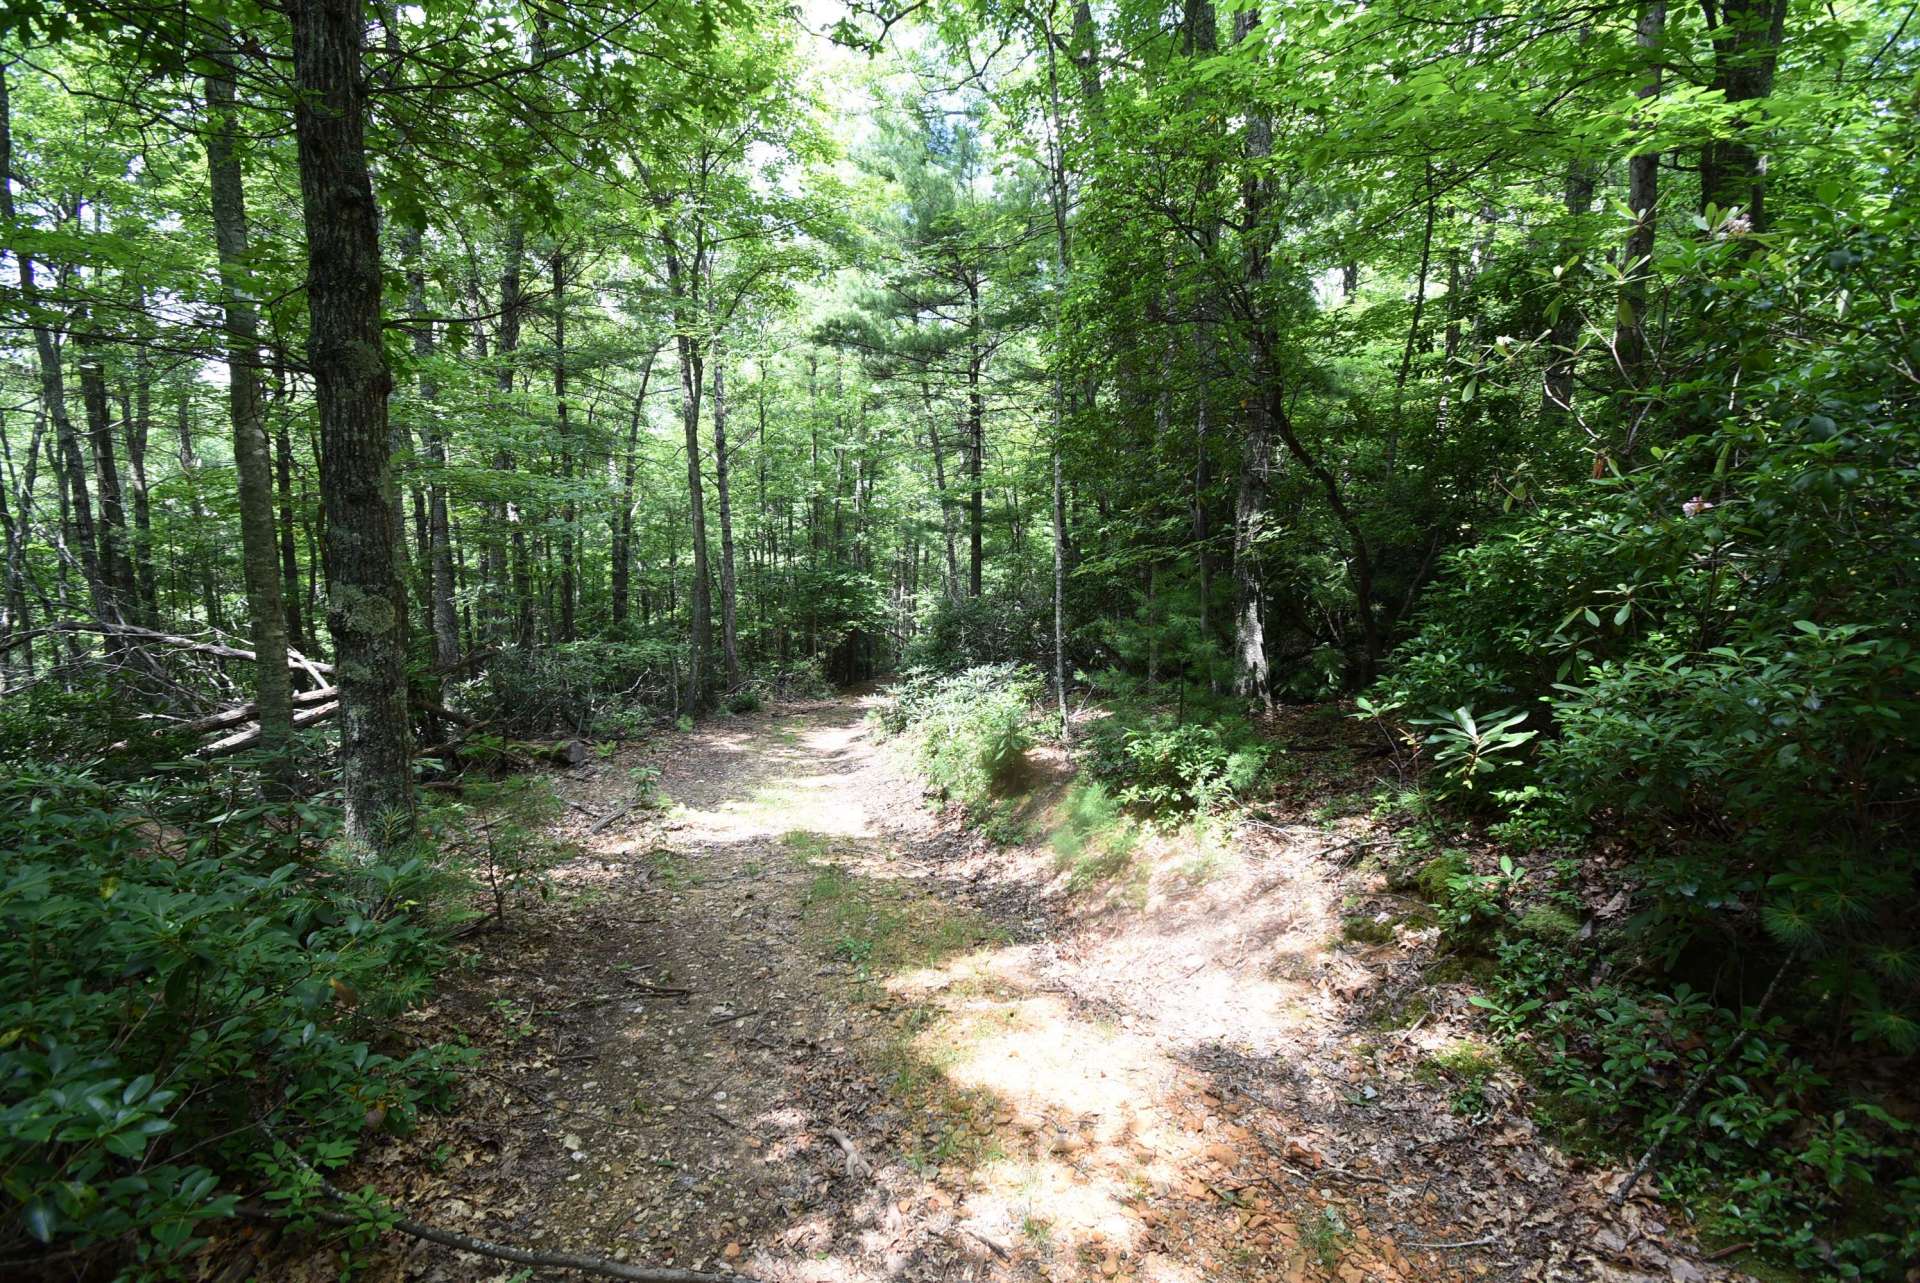 Trails run throughout the tract offering excellent hiking, horseback riding, or ATV adventures.